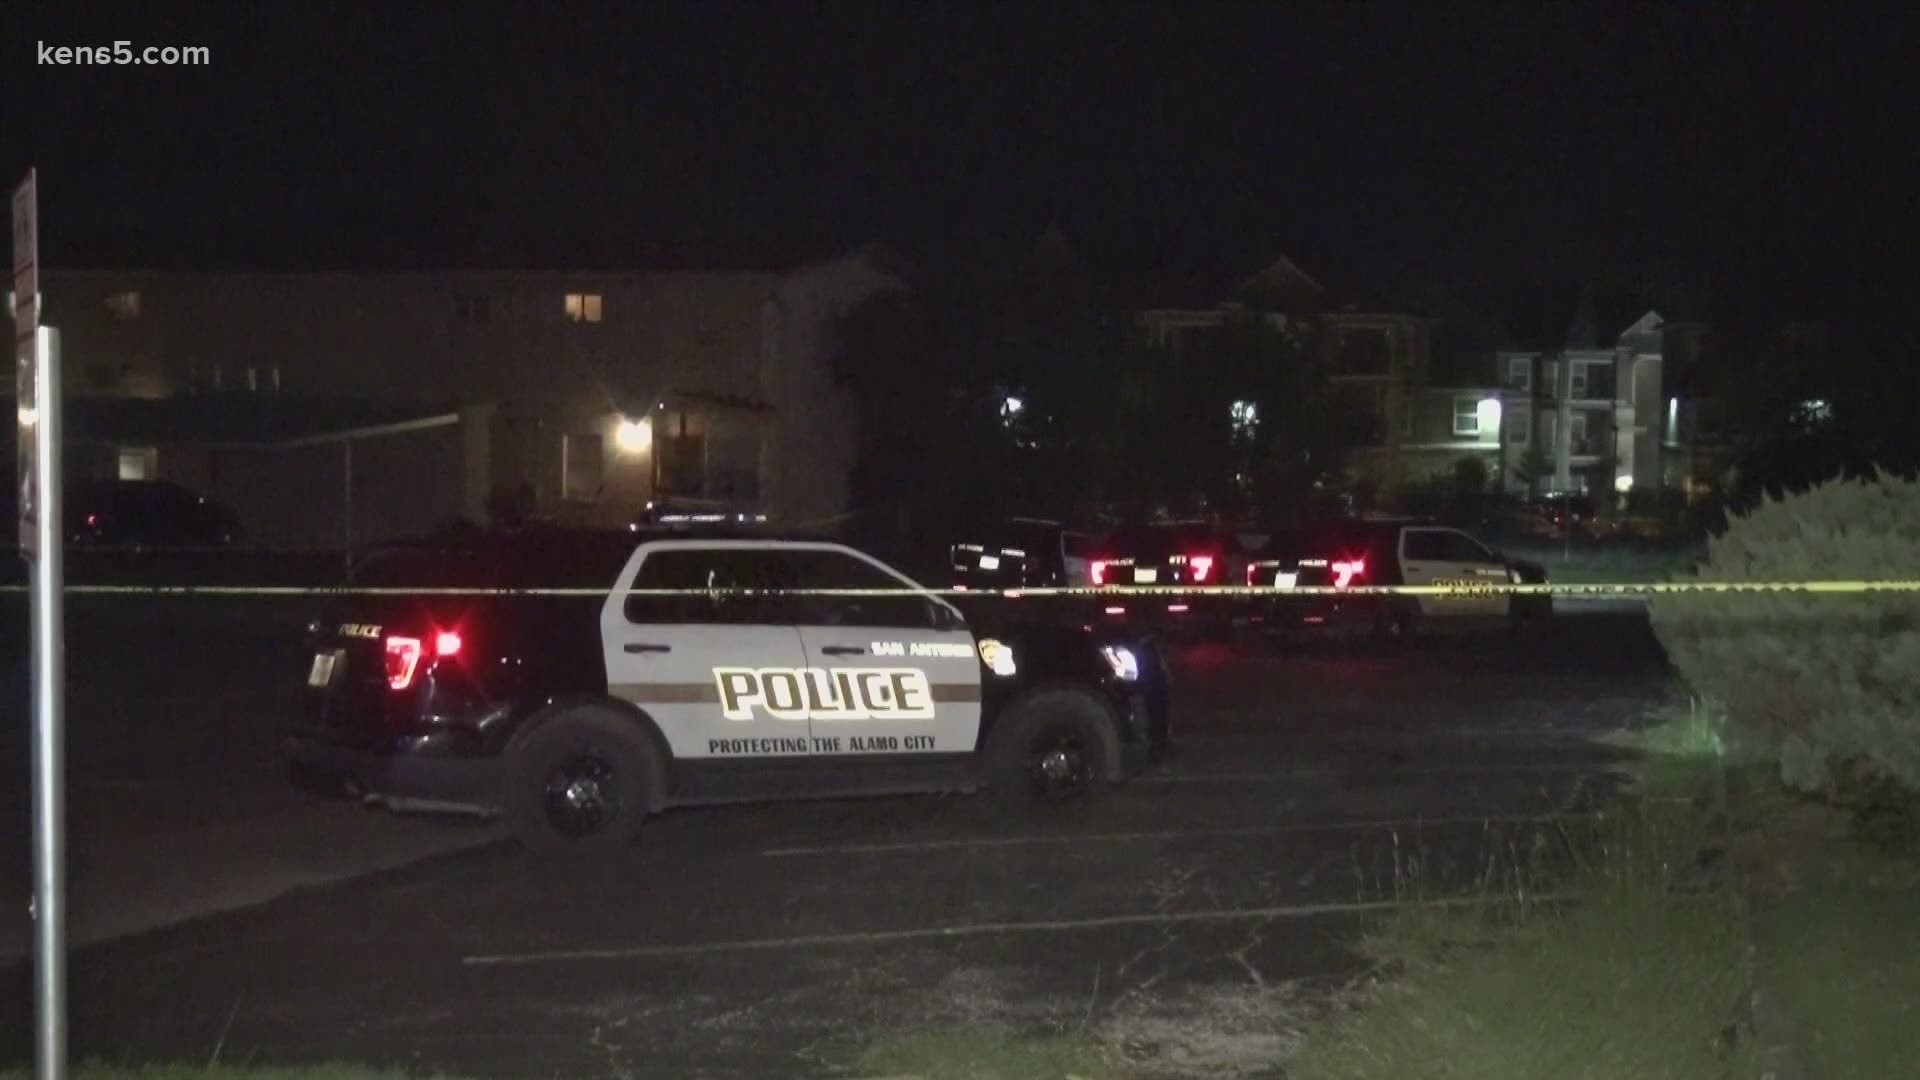 One man is dead and a woman was taken to a hospital after a shooting at an east-side apartment complex, San Antonio police said.